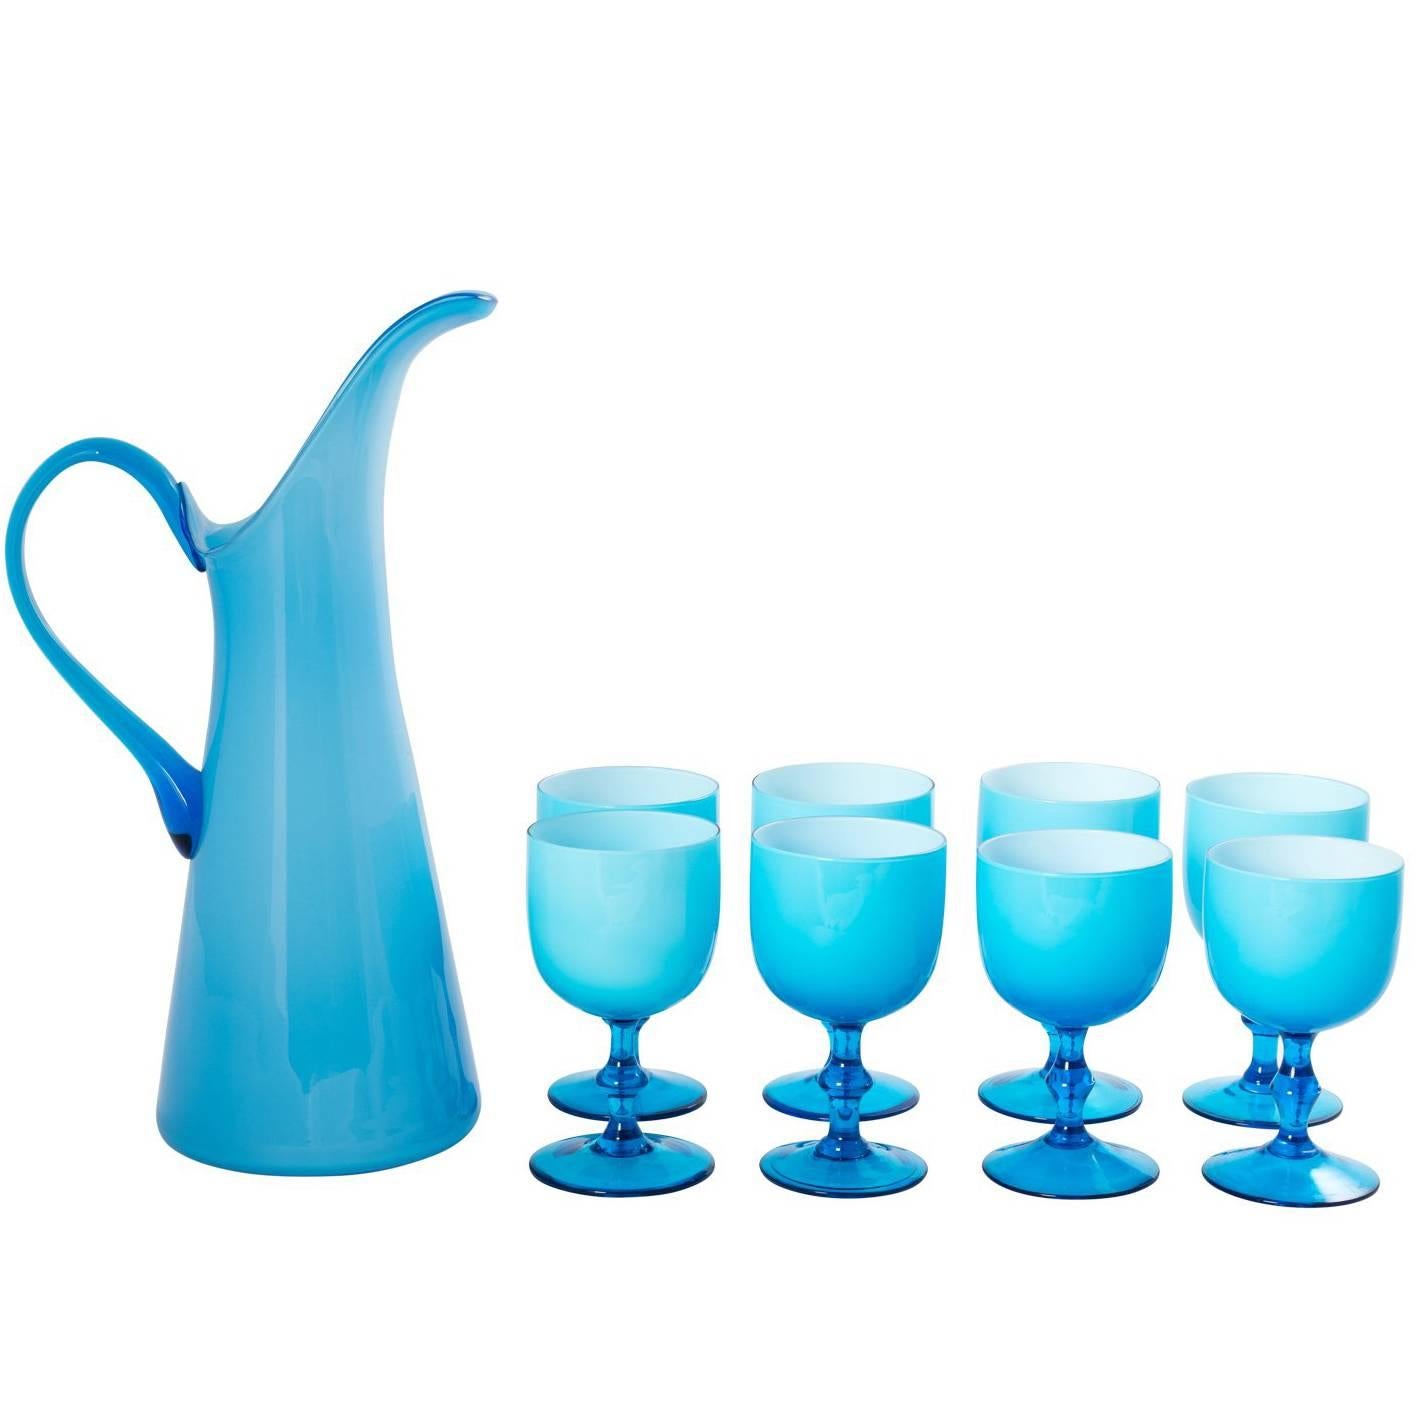 Set of Eight Italian Blue Glass Wine Goblets with Pitcher, circa 1960s For Sale